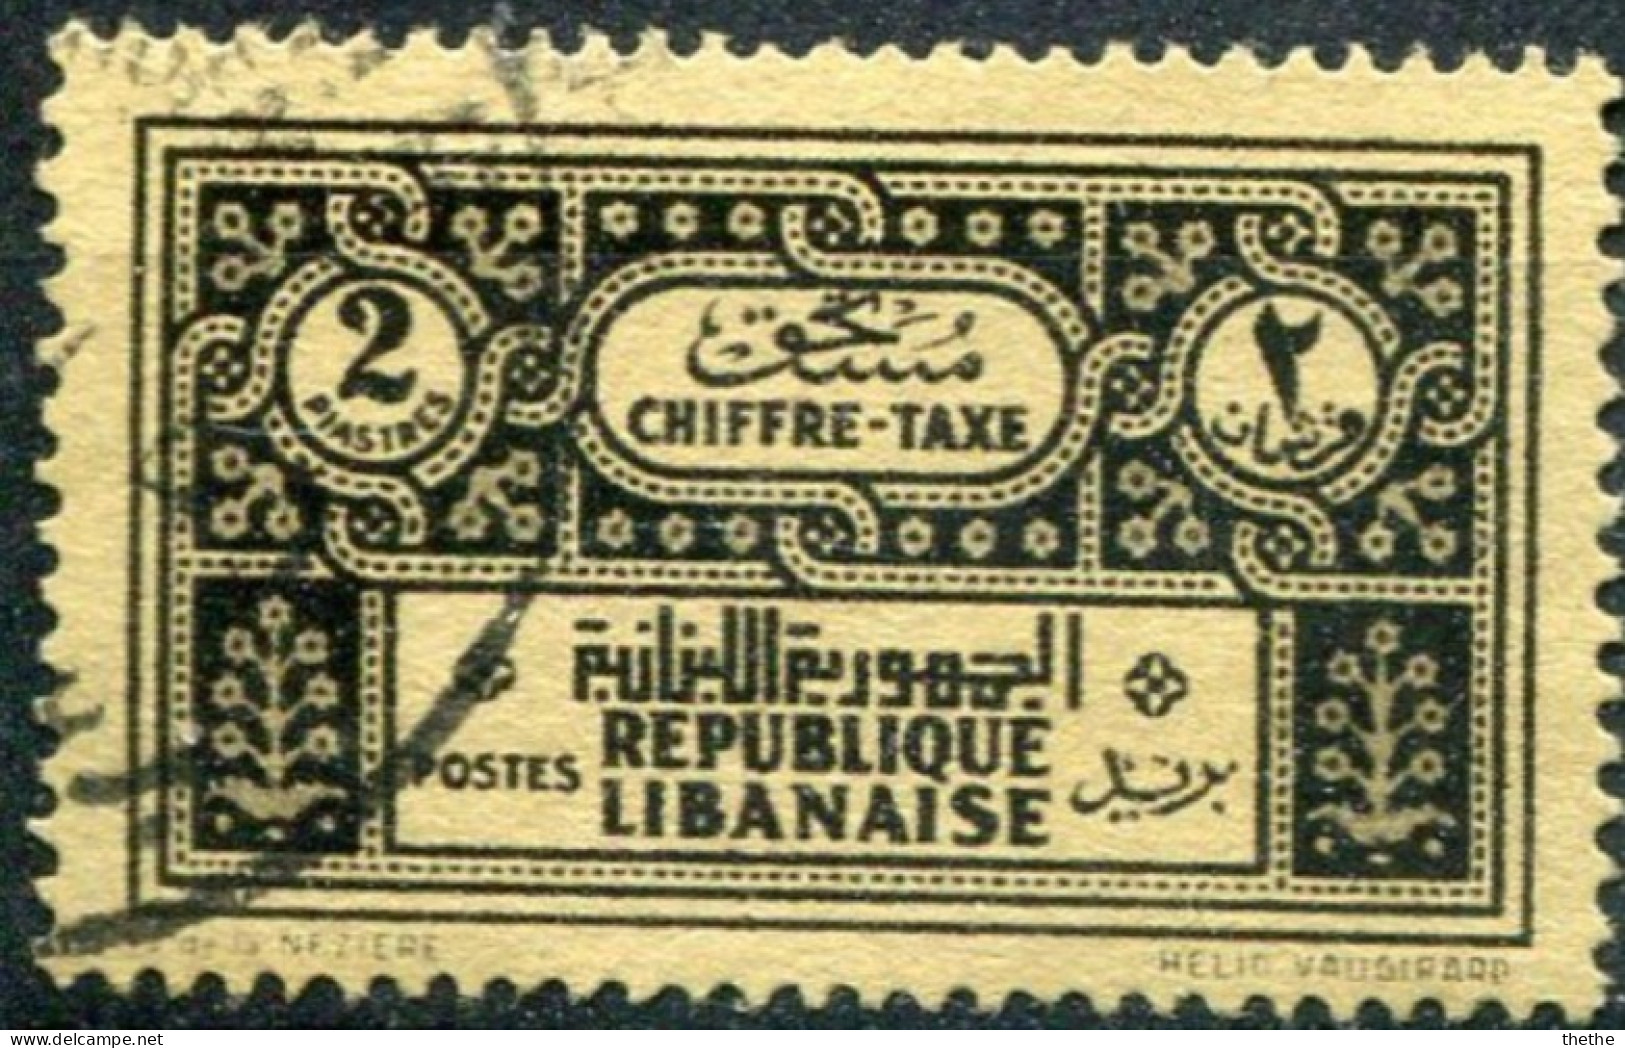 GRAND LIBAN - Chiffre-Taxe - Postage Due